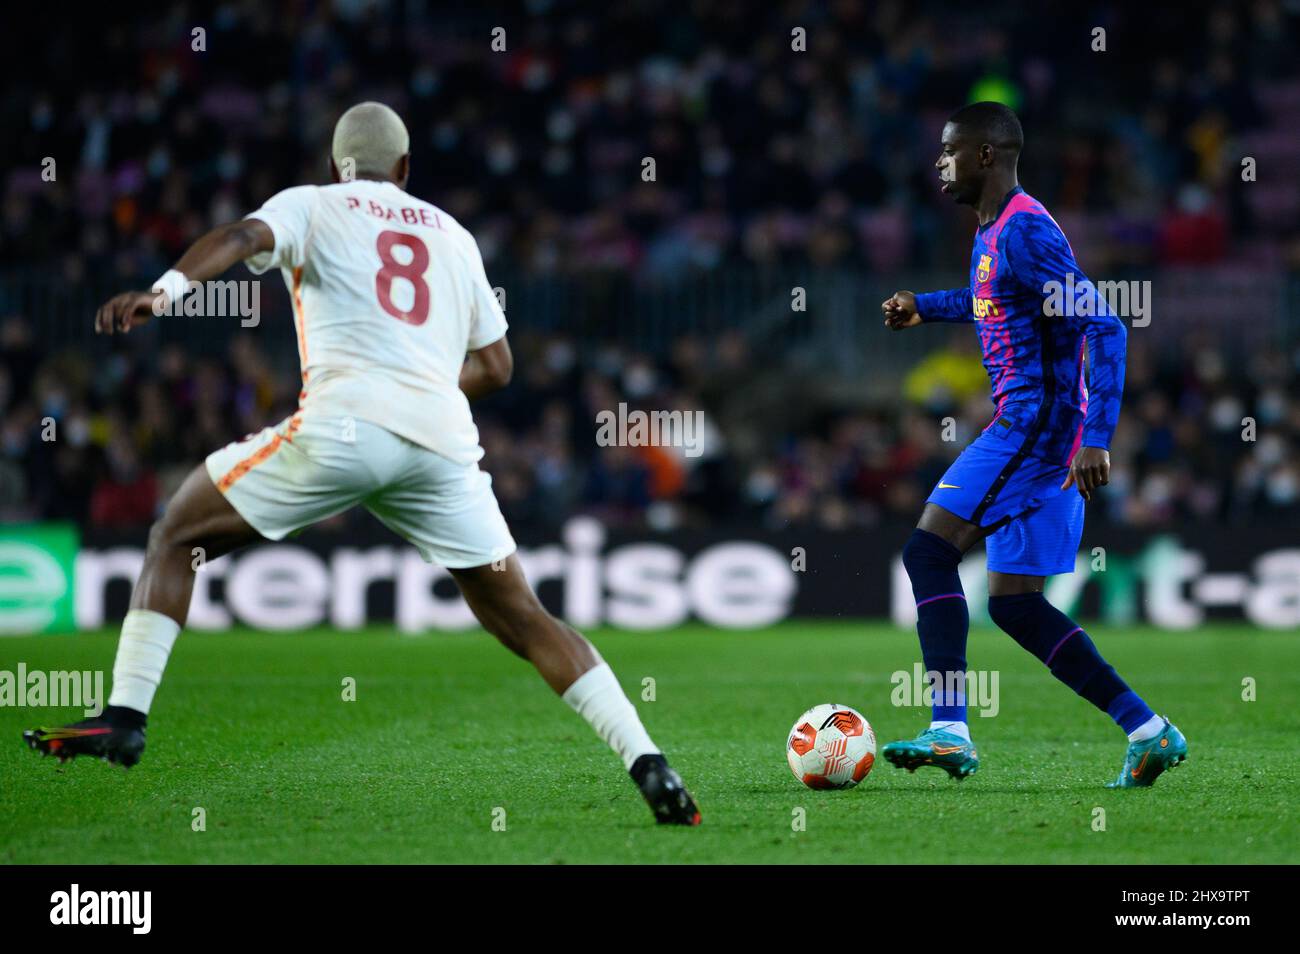 Barcelona, Spain. 10th Mar, 2022. BARCELONA, SPAIN - MARCH 10: Ousmane Dembele of FC Barcelona during the UEFA Europa League match between FC Barcelona and Galatasaray at Camp Nou on March 10, 2022 in Barcelona, Spain (Photo by Dax Images/Orange Pictures) Credit: Orange Pics BV/Alamy Live News Stock Photo